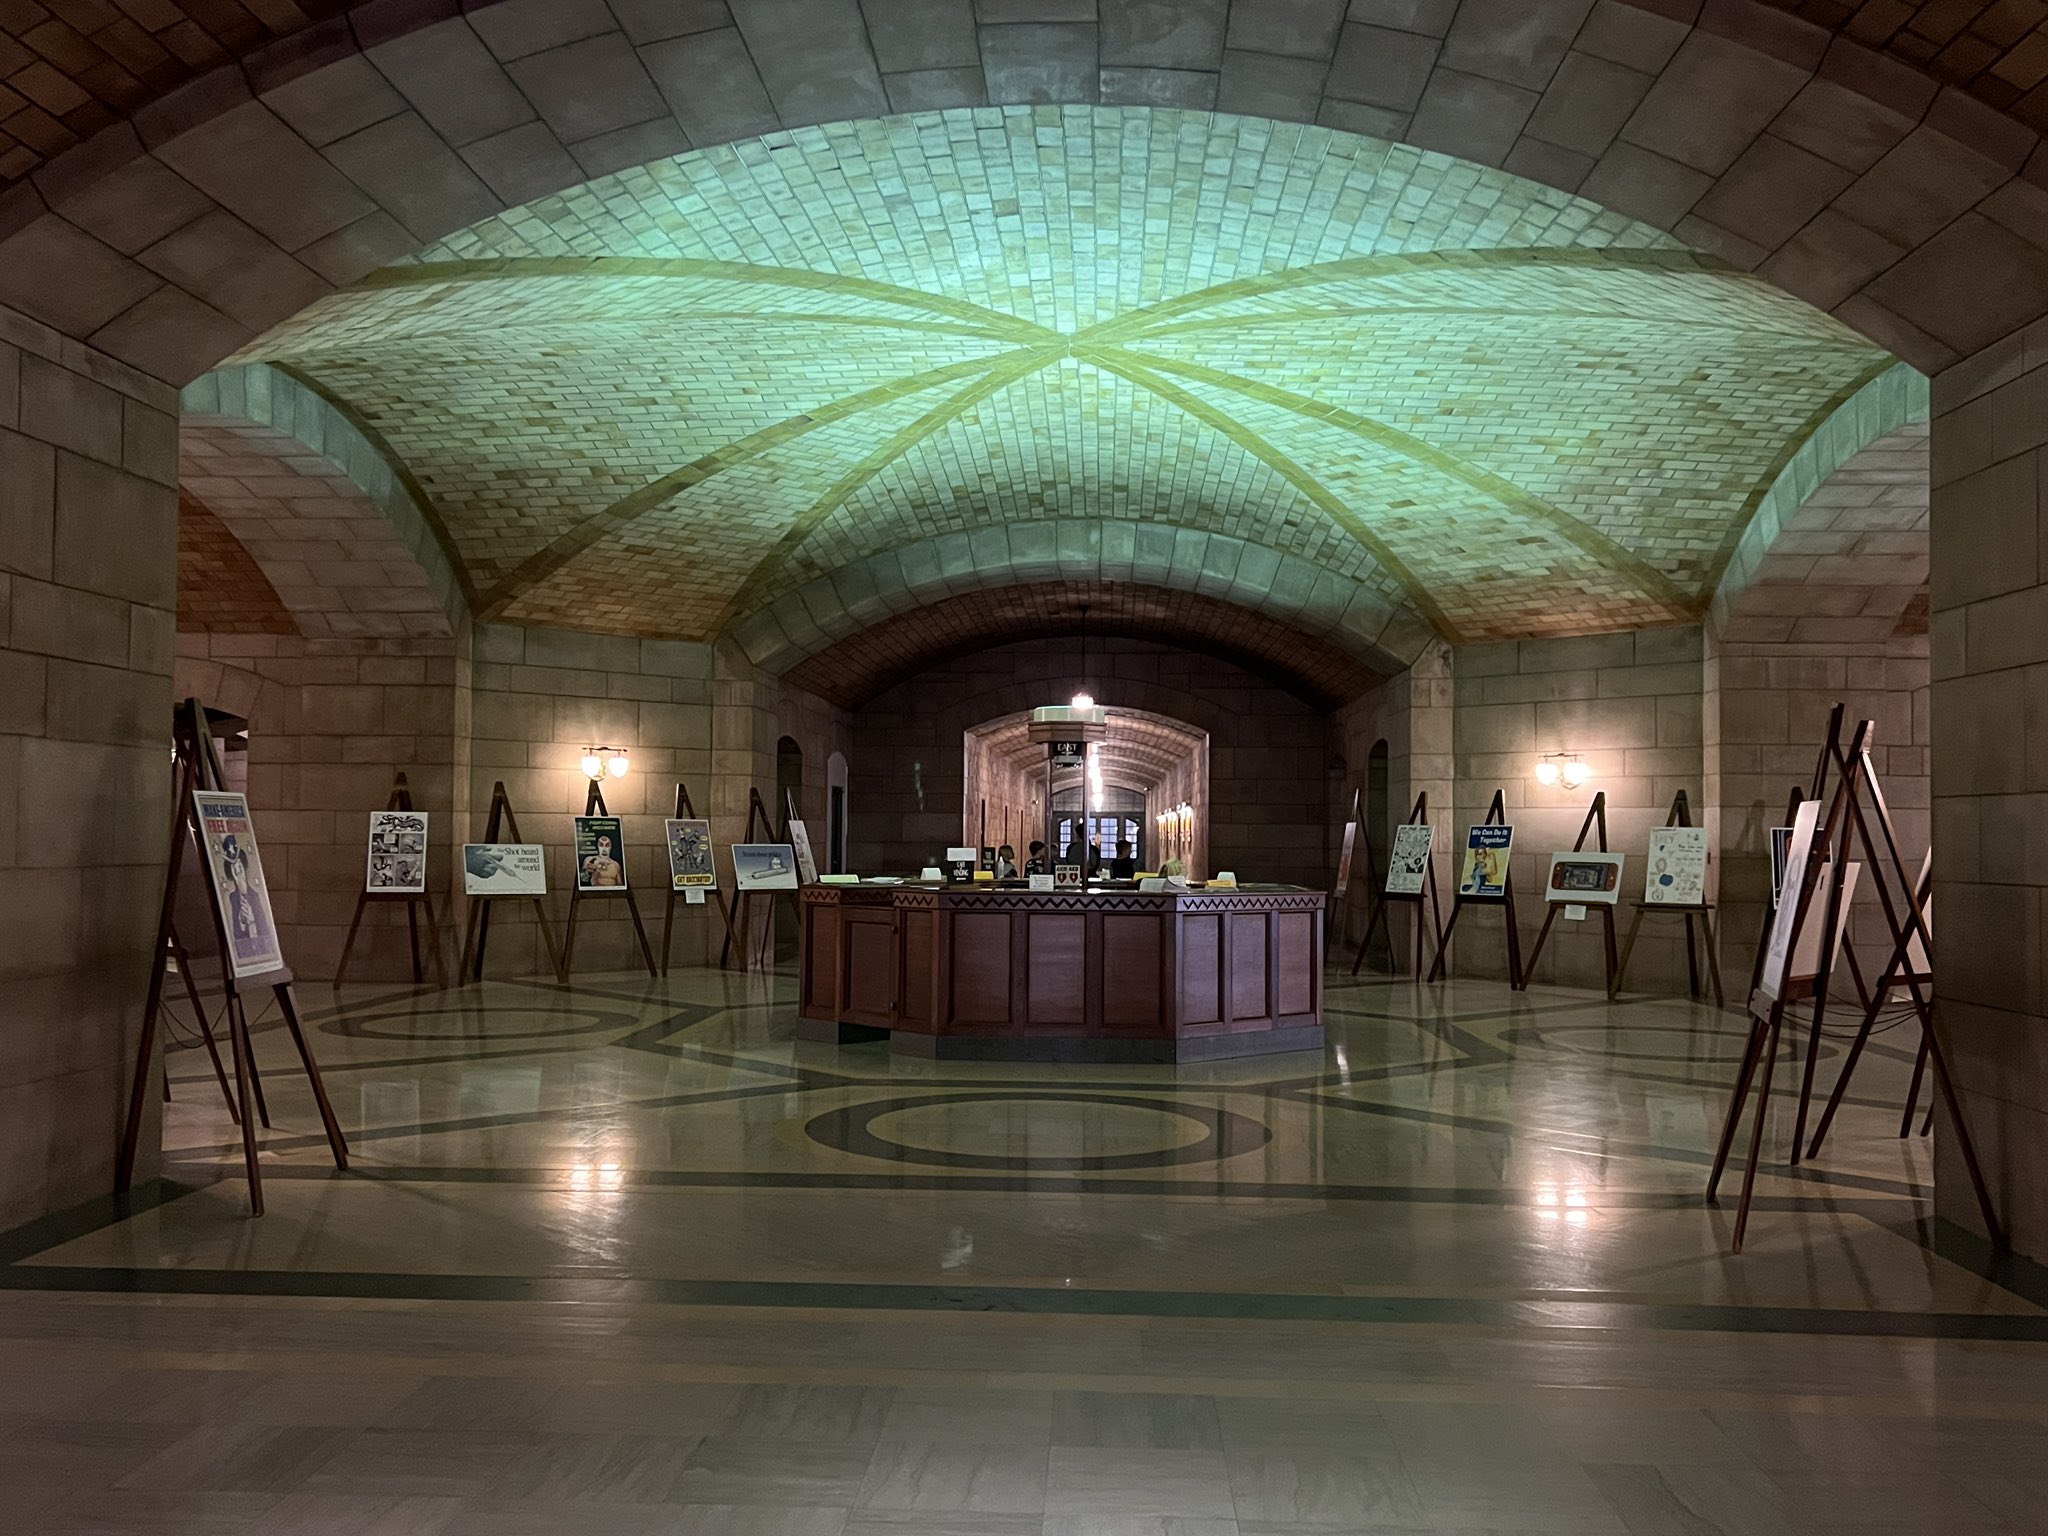 Light reflects across the ceiling of the Nebraska State Capitol first floor rotunda, creating a green glow. Posters are displayed on wooden easels around the marble interior.